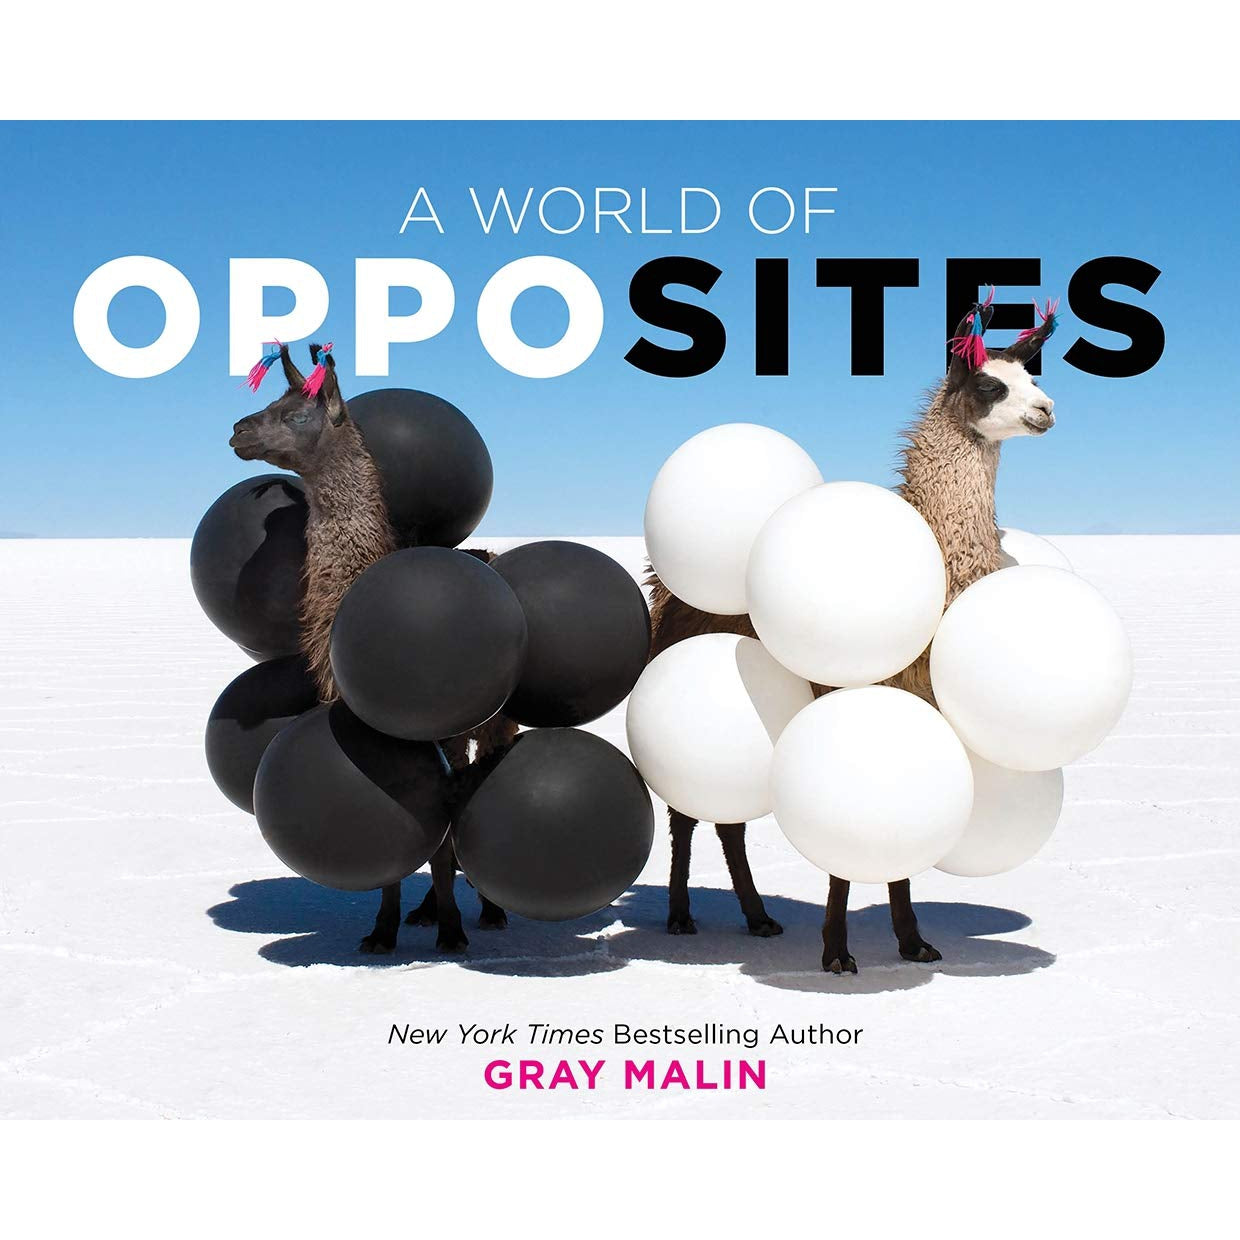 Gray Malin: A World of Opposites